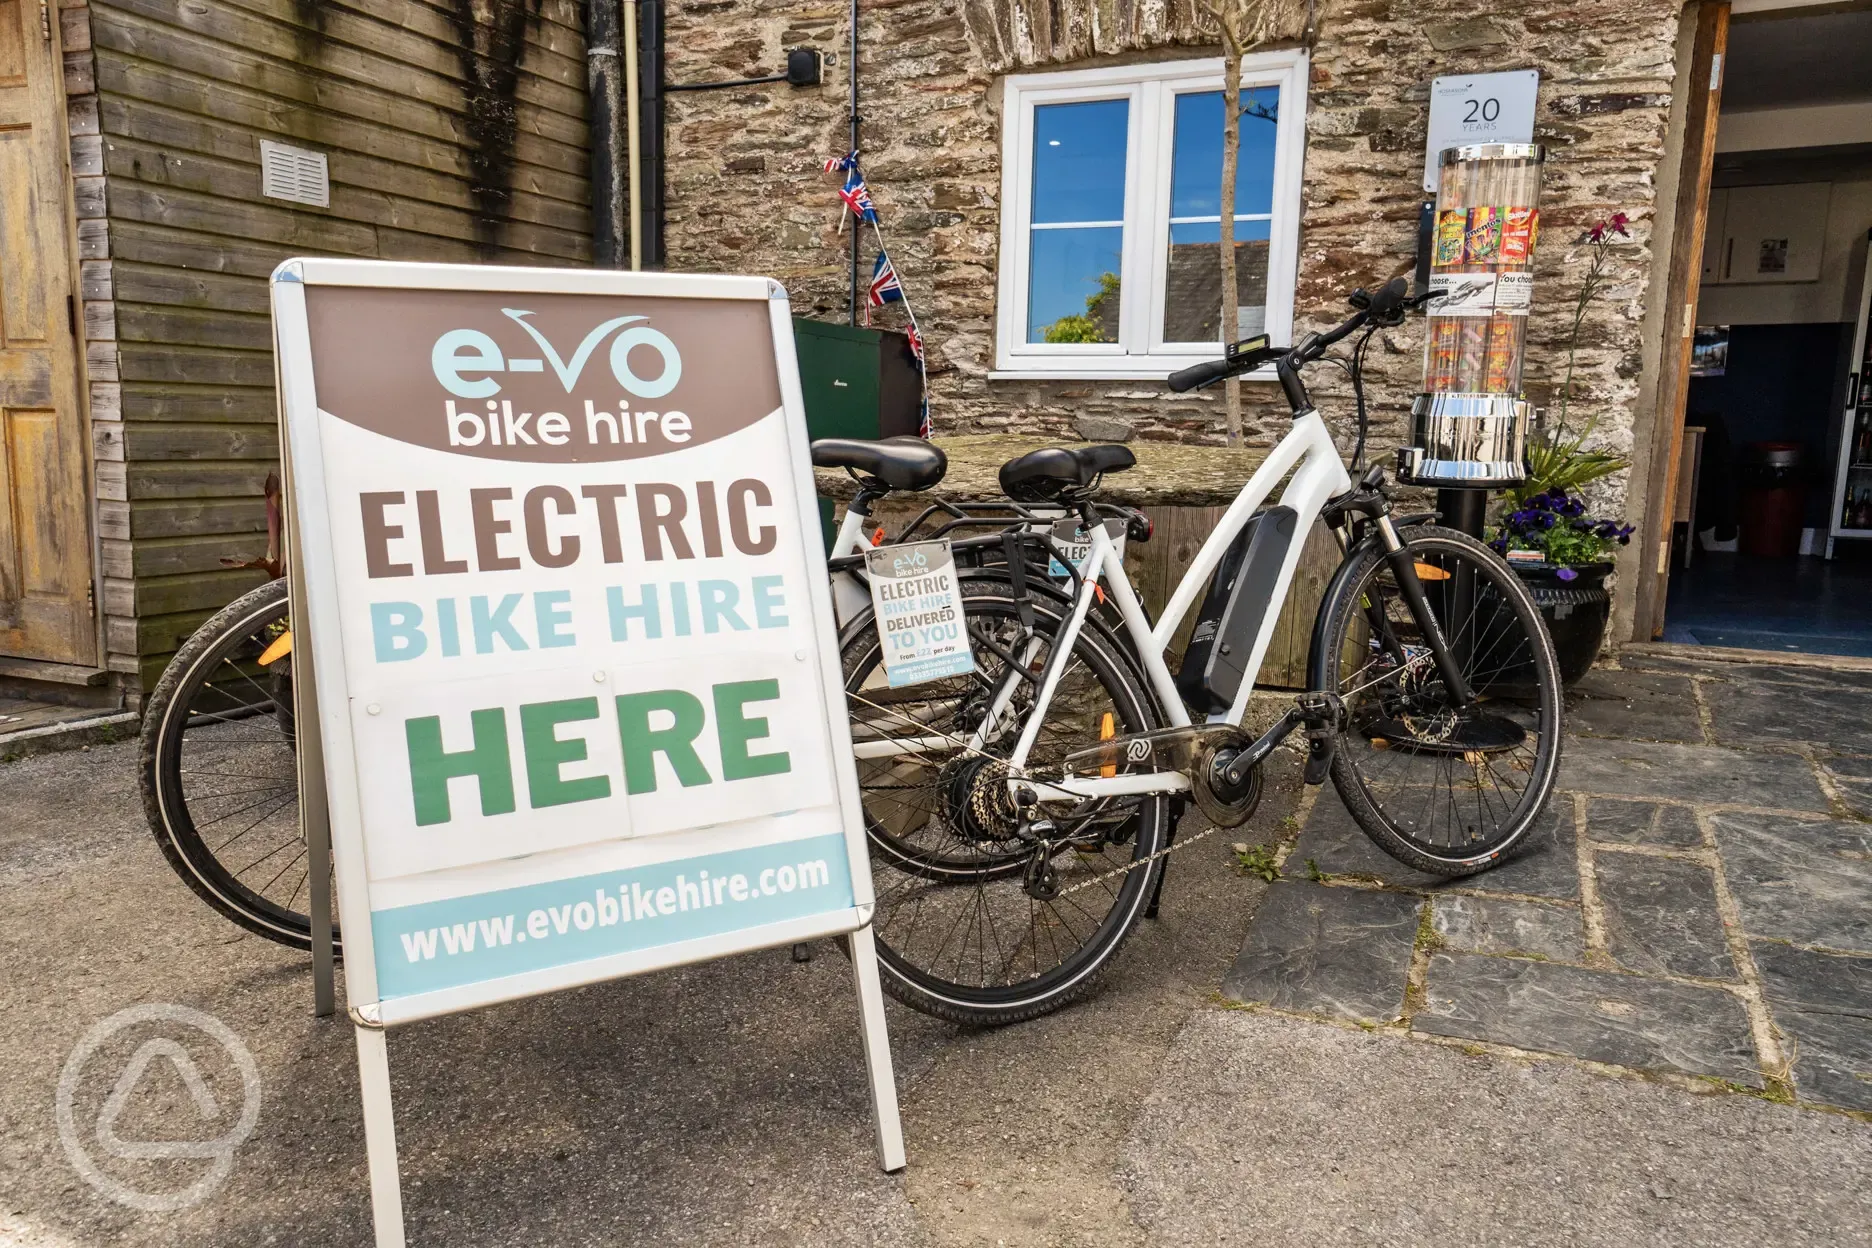 Electric bike hire available 